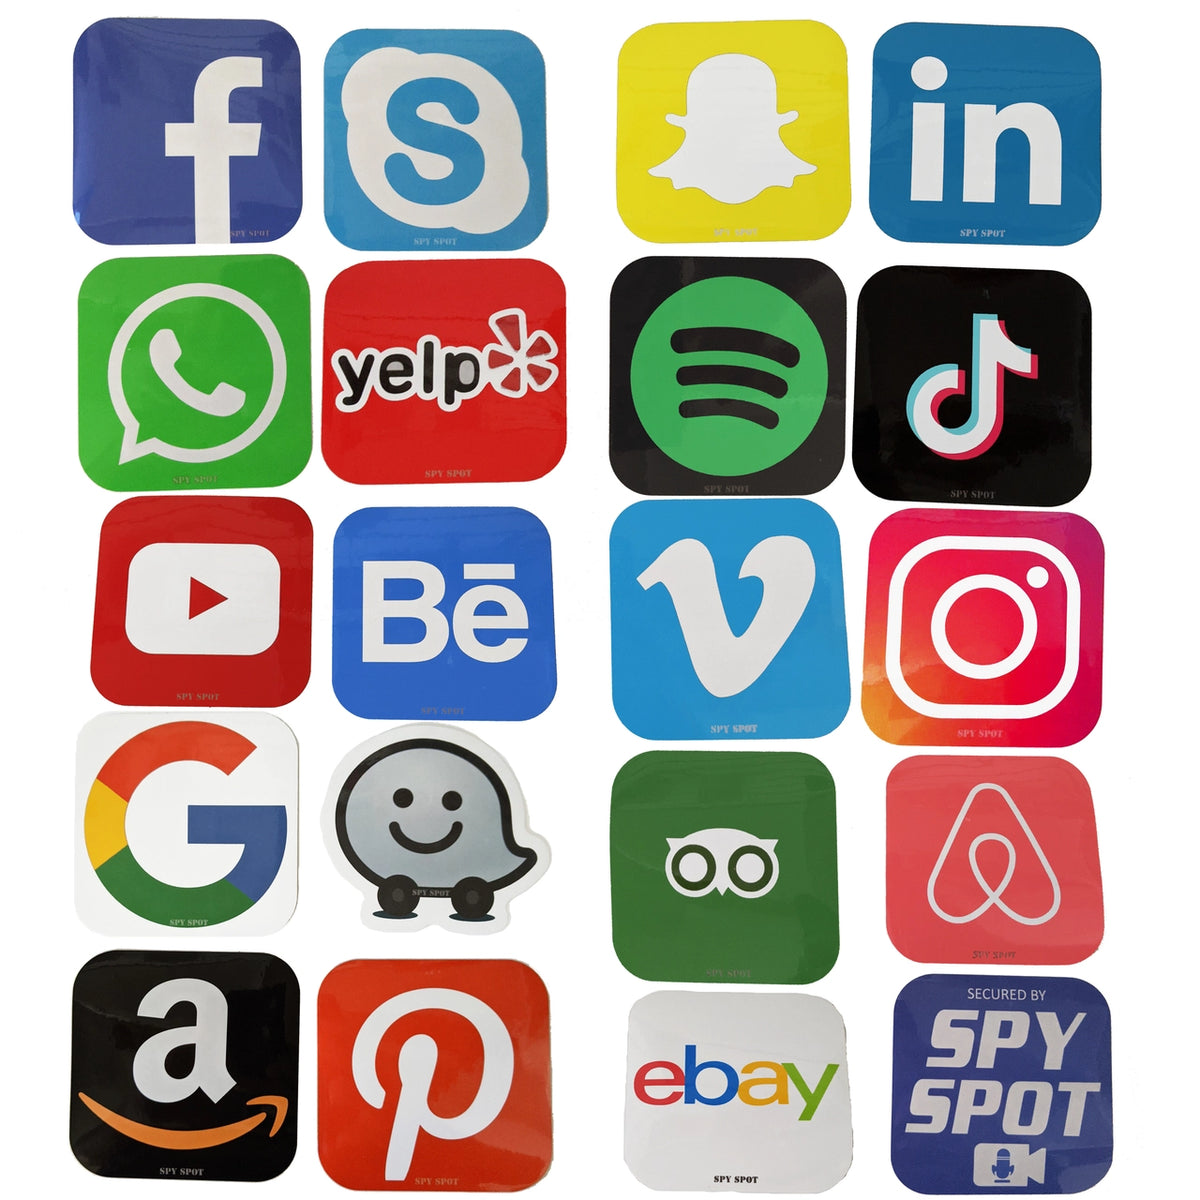 Spy Spot Set of 19 Social Media Video Travel Messaging Business Music Stickers Decals Water Resistant UV Resistant 3.35" x 3.35"